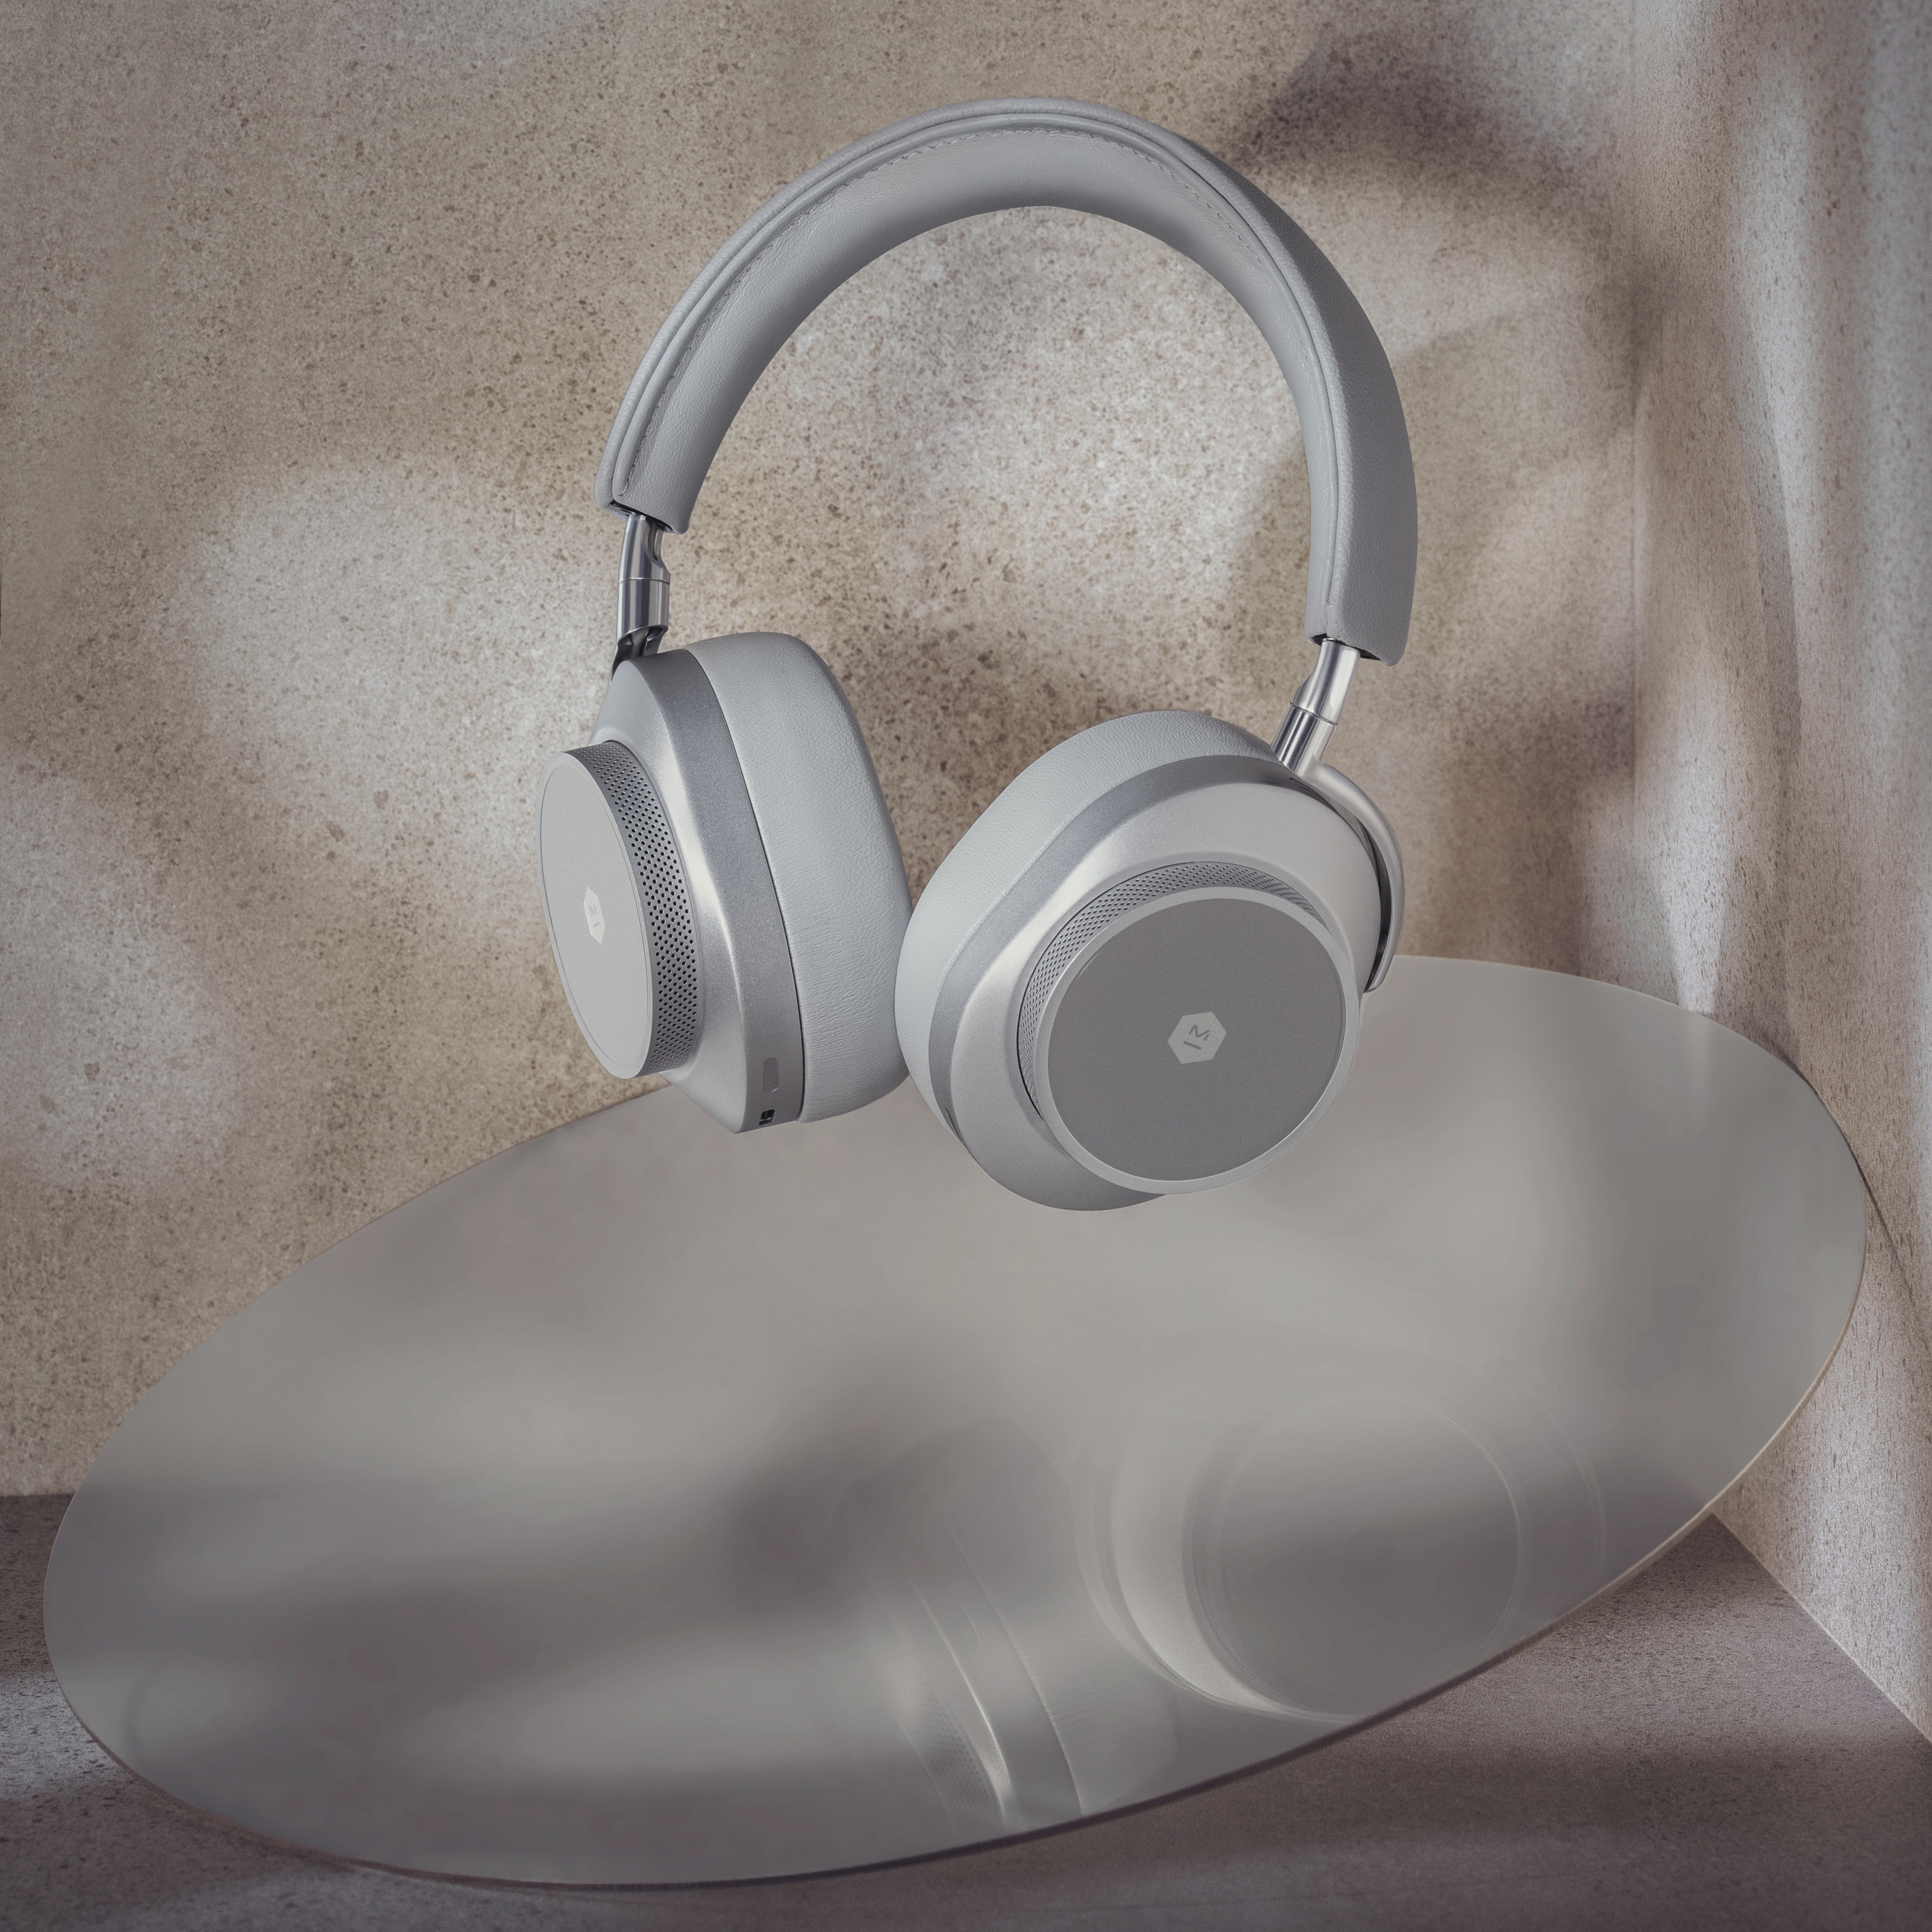 The MW75 Active Noise-Cancelling Headphones in Silver Metal/Grey Leather